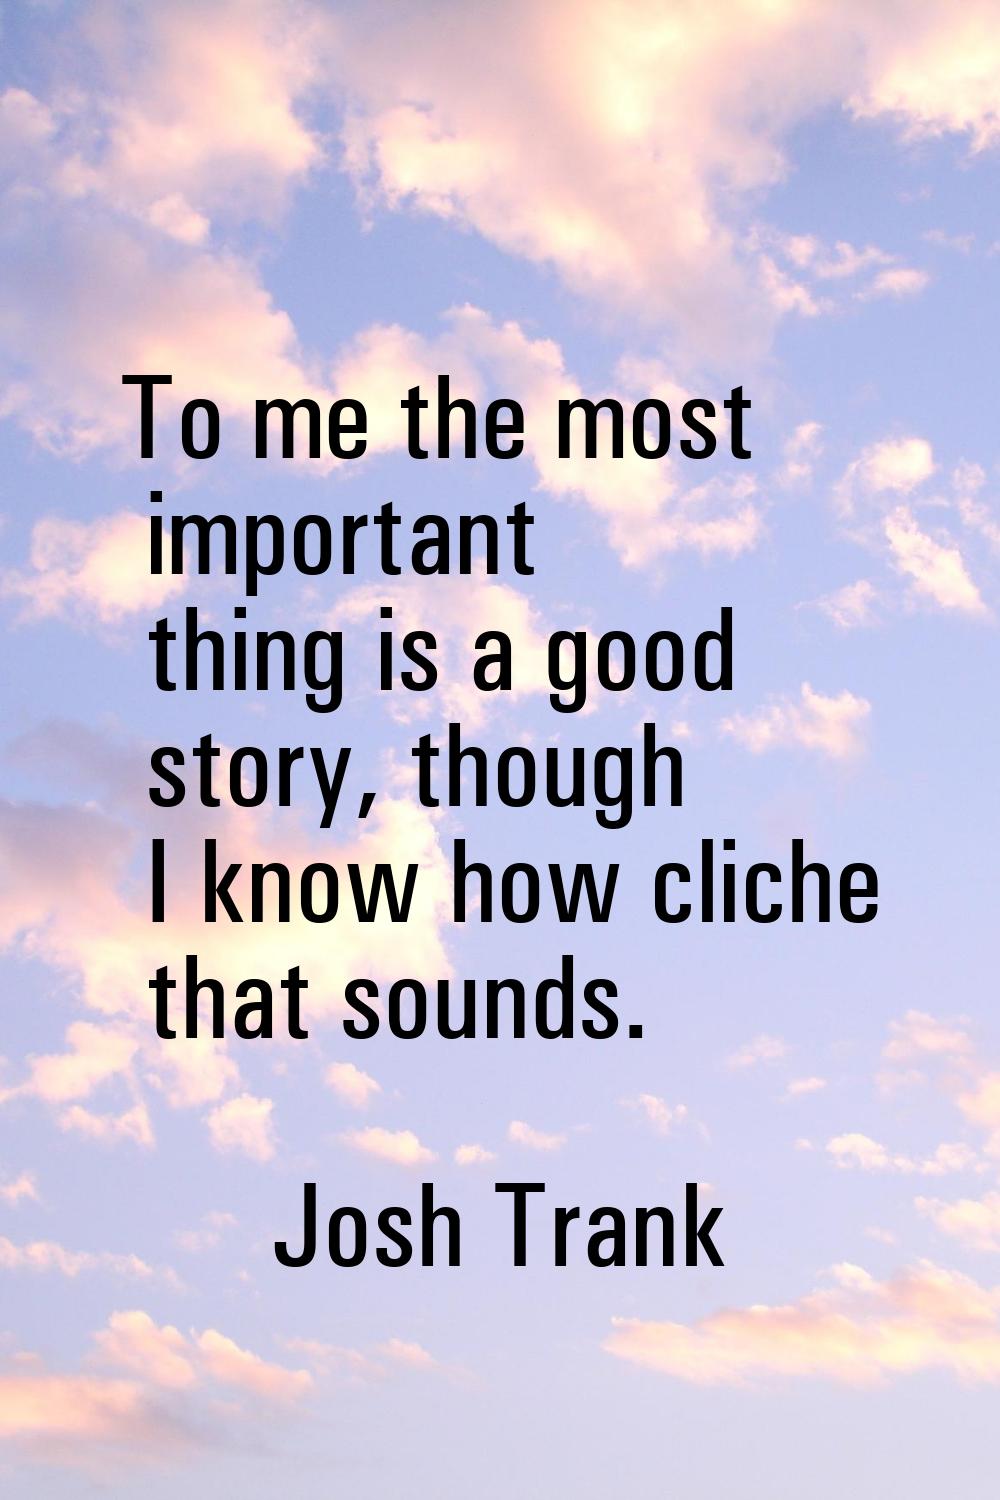 To me the most important thing is a good story, though I know how cliche that sounds.